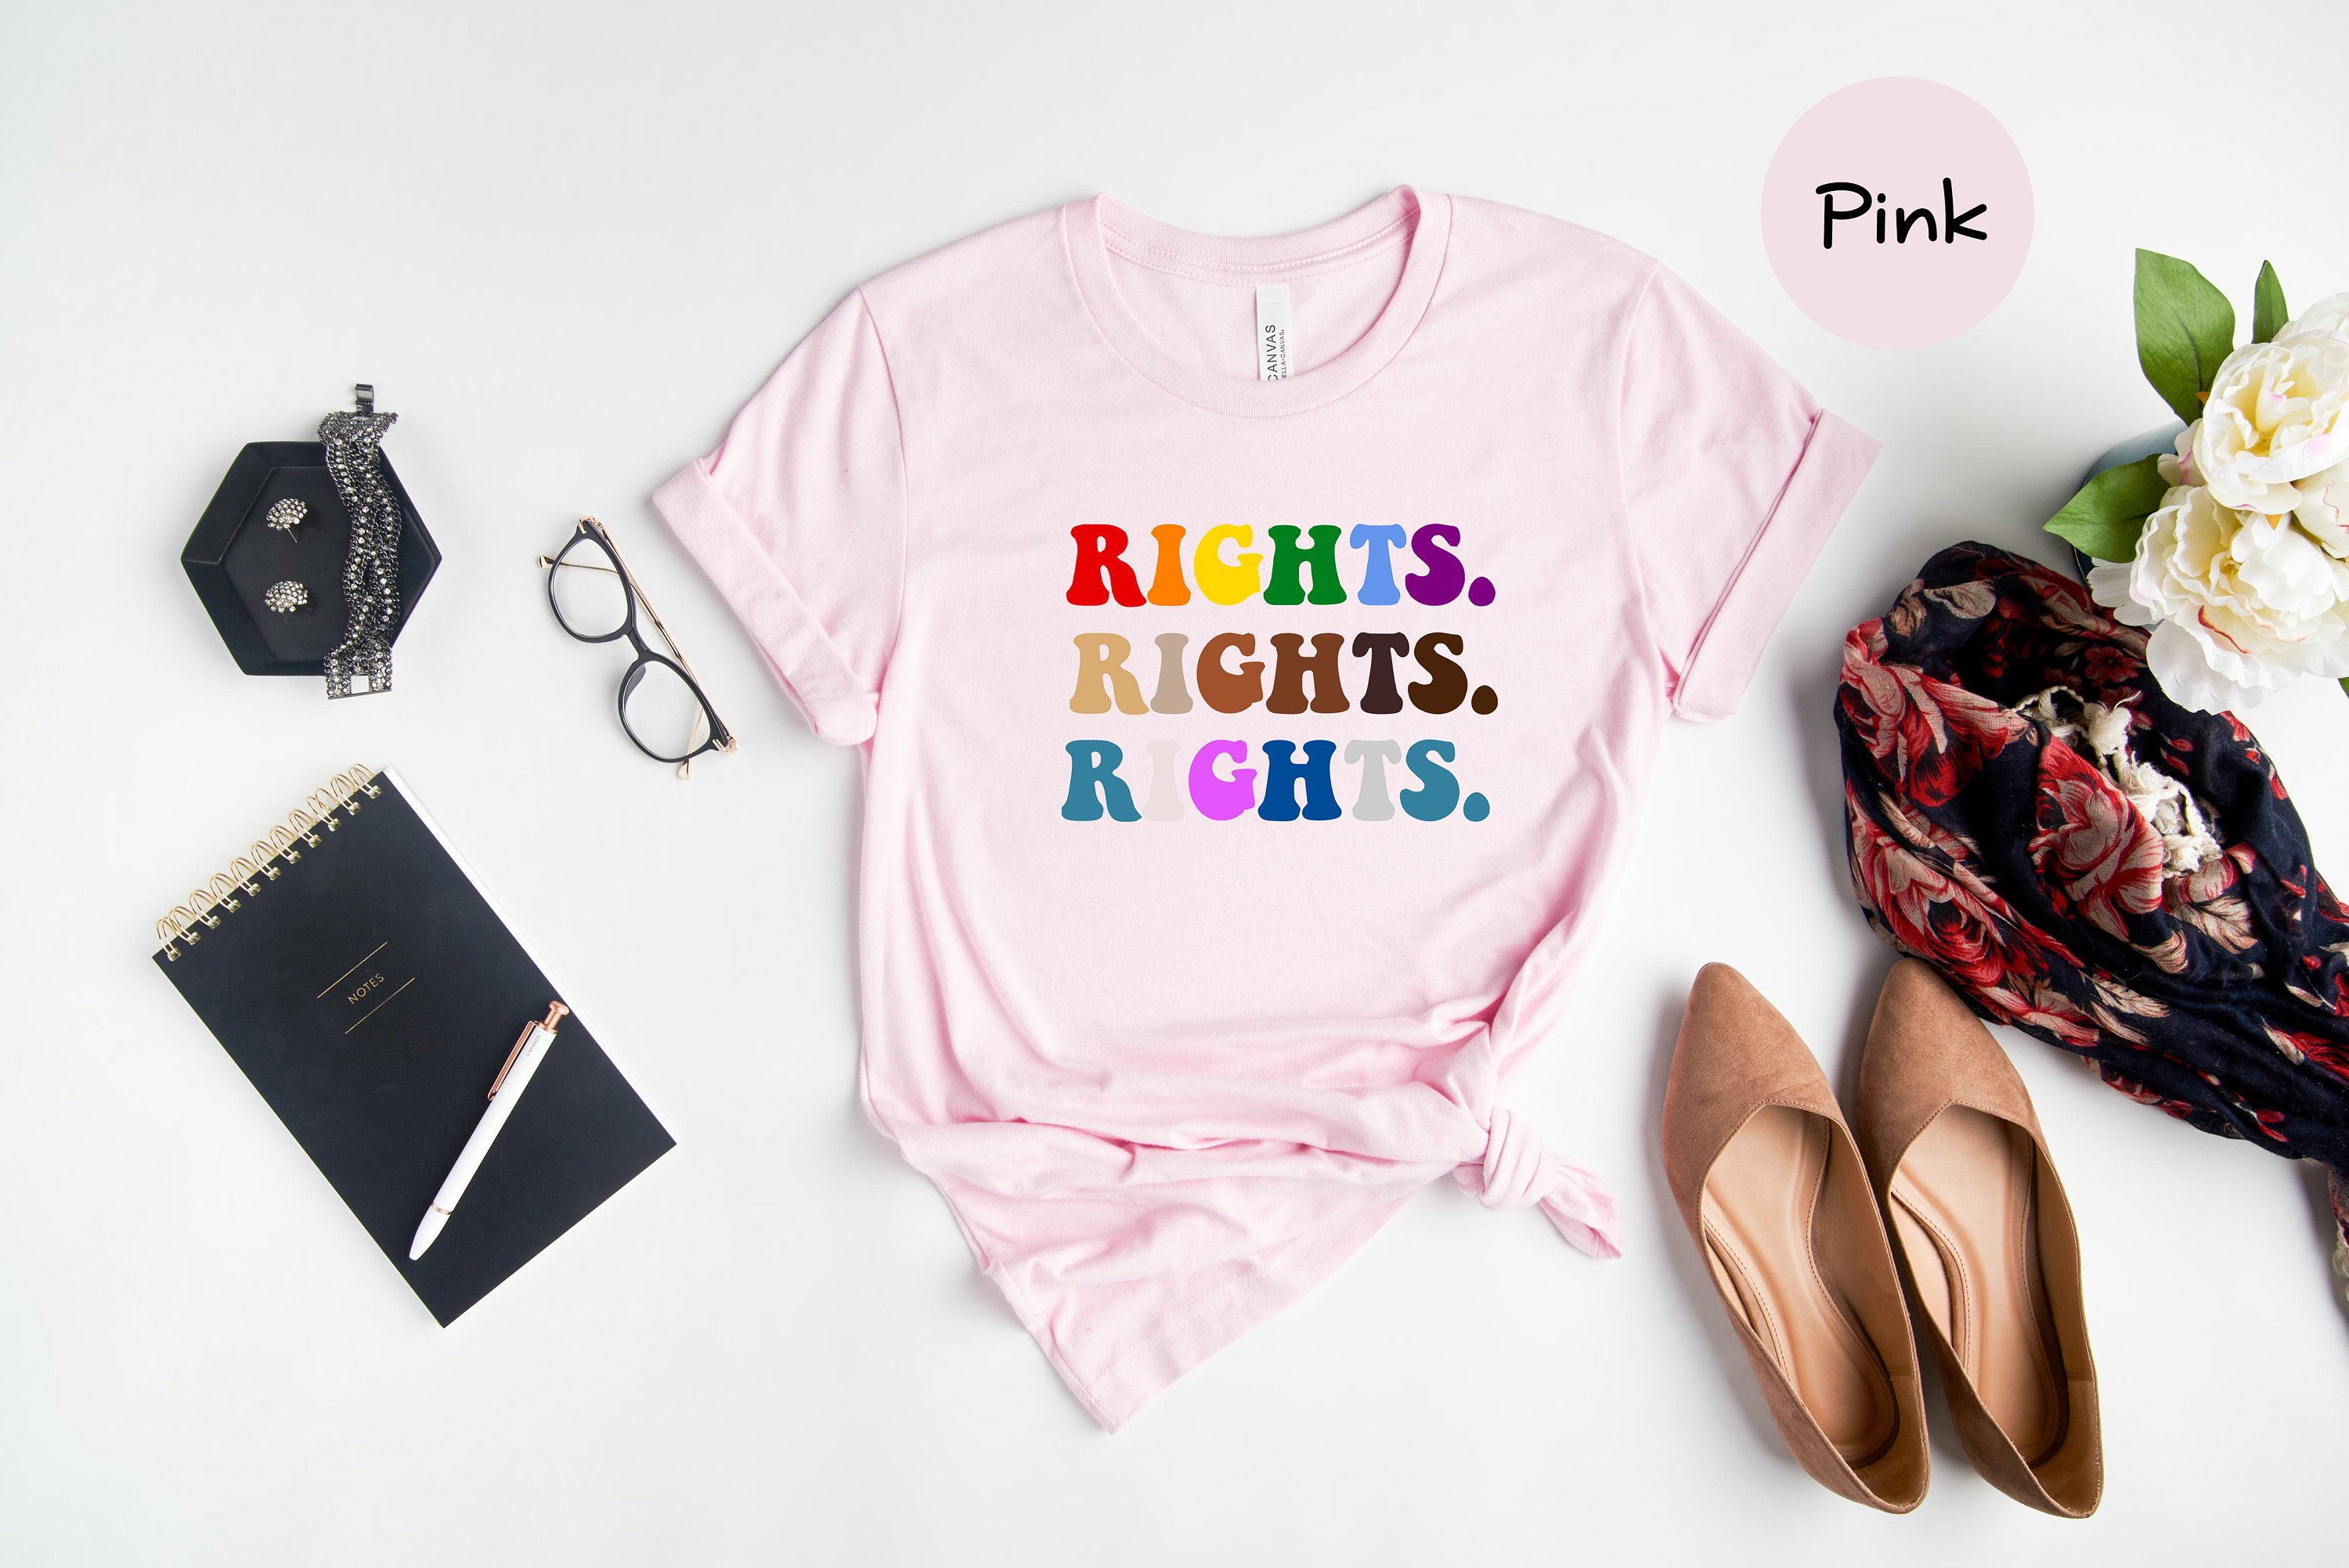 Discover Pride Rights BLM Rights-Lgbt Rights, Blm Shirt, Pride Shirt, Lgbt Shirt, Lgbtq Shirt, Pride T-Shirt, Lgbt T-Shirt, Lesbian Shirt, Gay Shirt